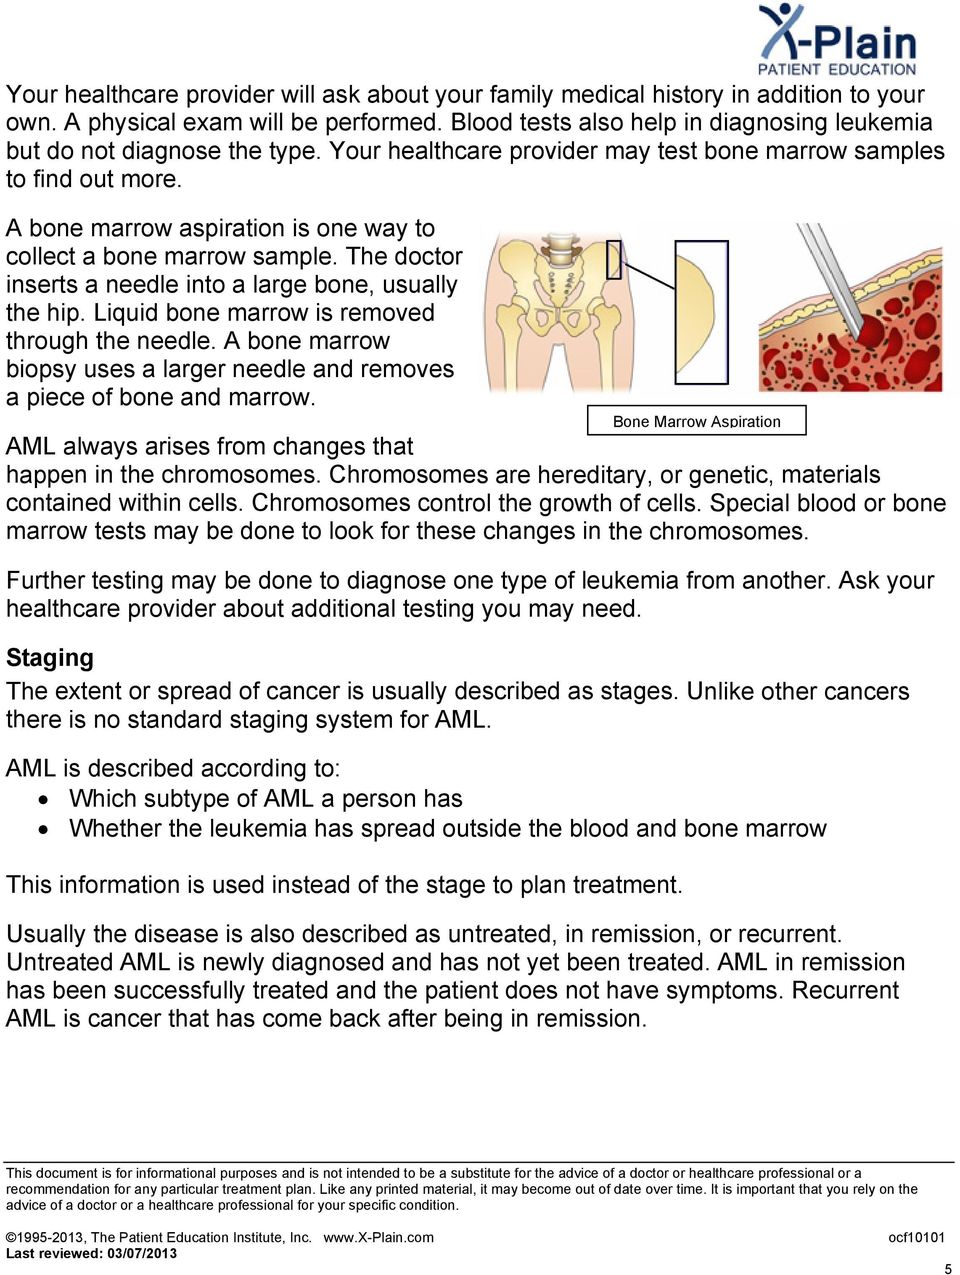 A bone marrow aspiration is one way to collect a bone marrow sample. The doctor inserts a needle into a large bone, usually the hip. Liquid bone marrow is removed through the needle.